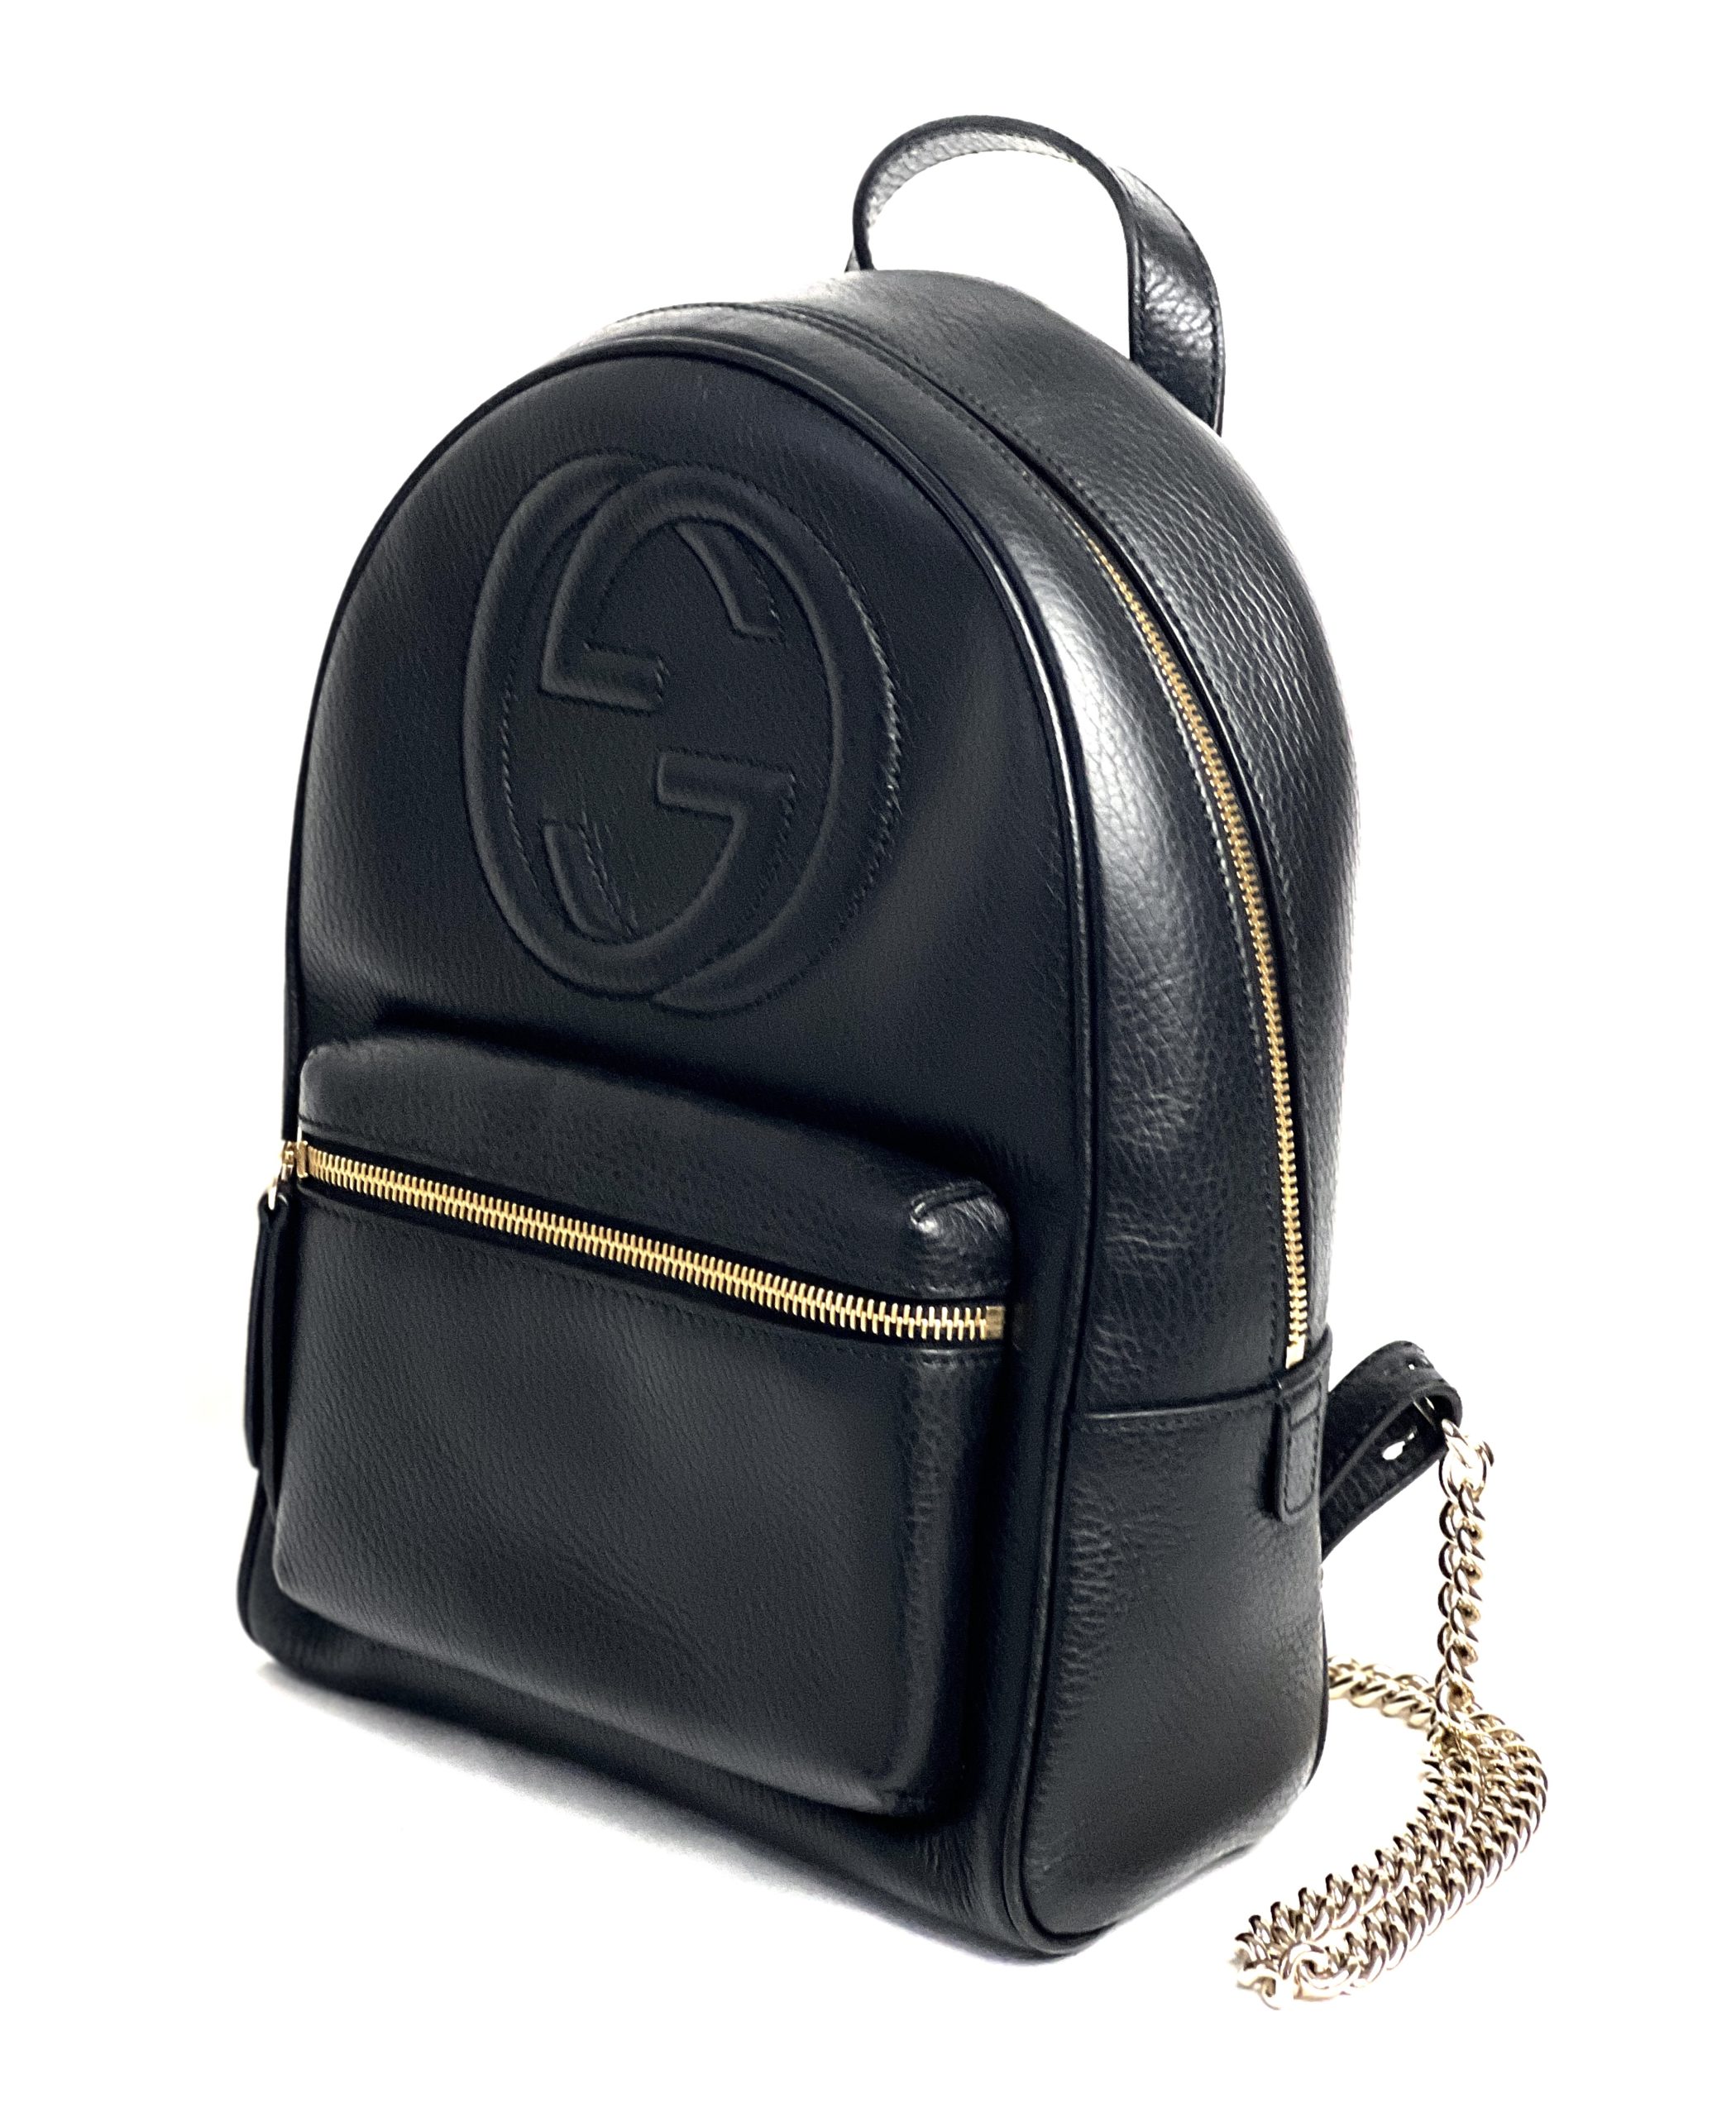 Luxury backpack - Gucci black backpack with straps